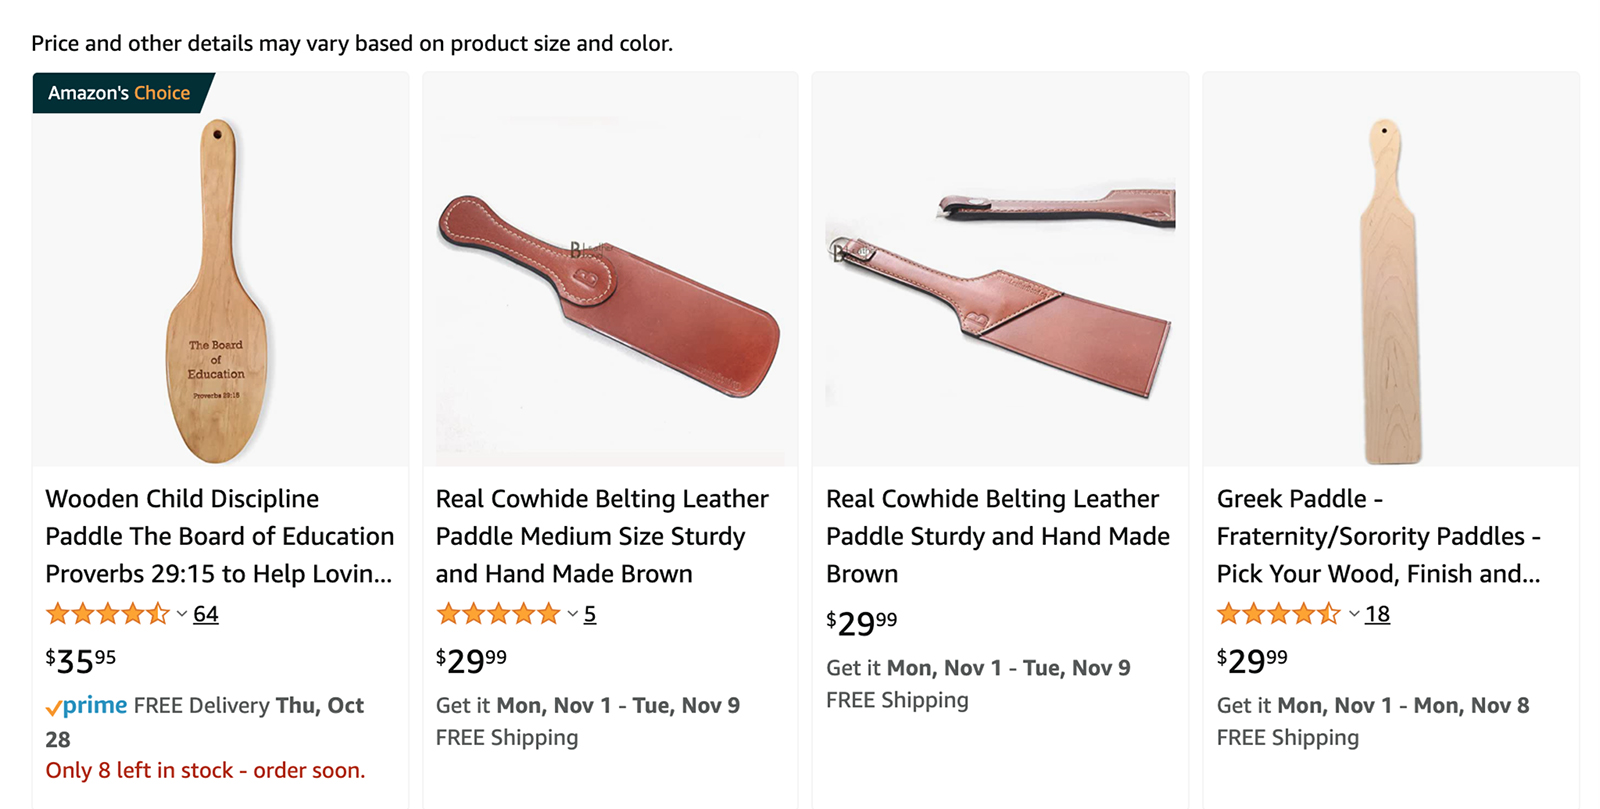 The Montgomery Line wooden child discipline paddle, left, with the Amazon's Choice designation. Screengrab